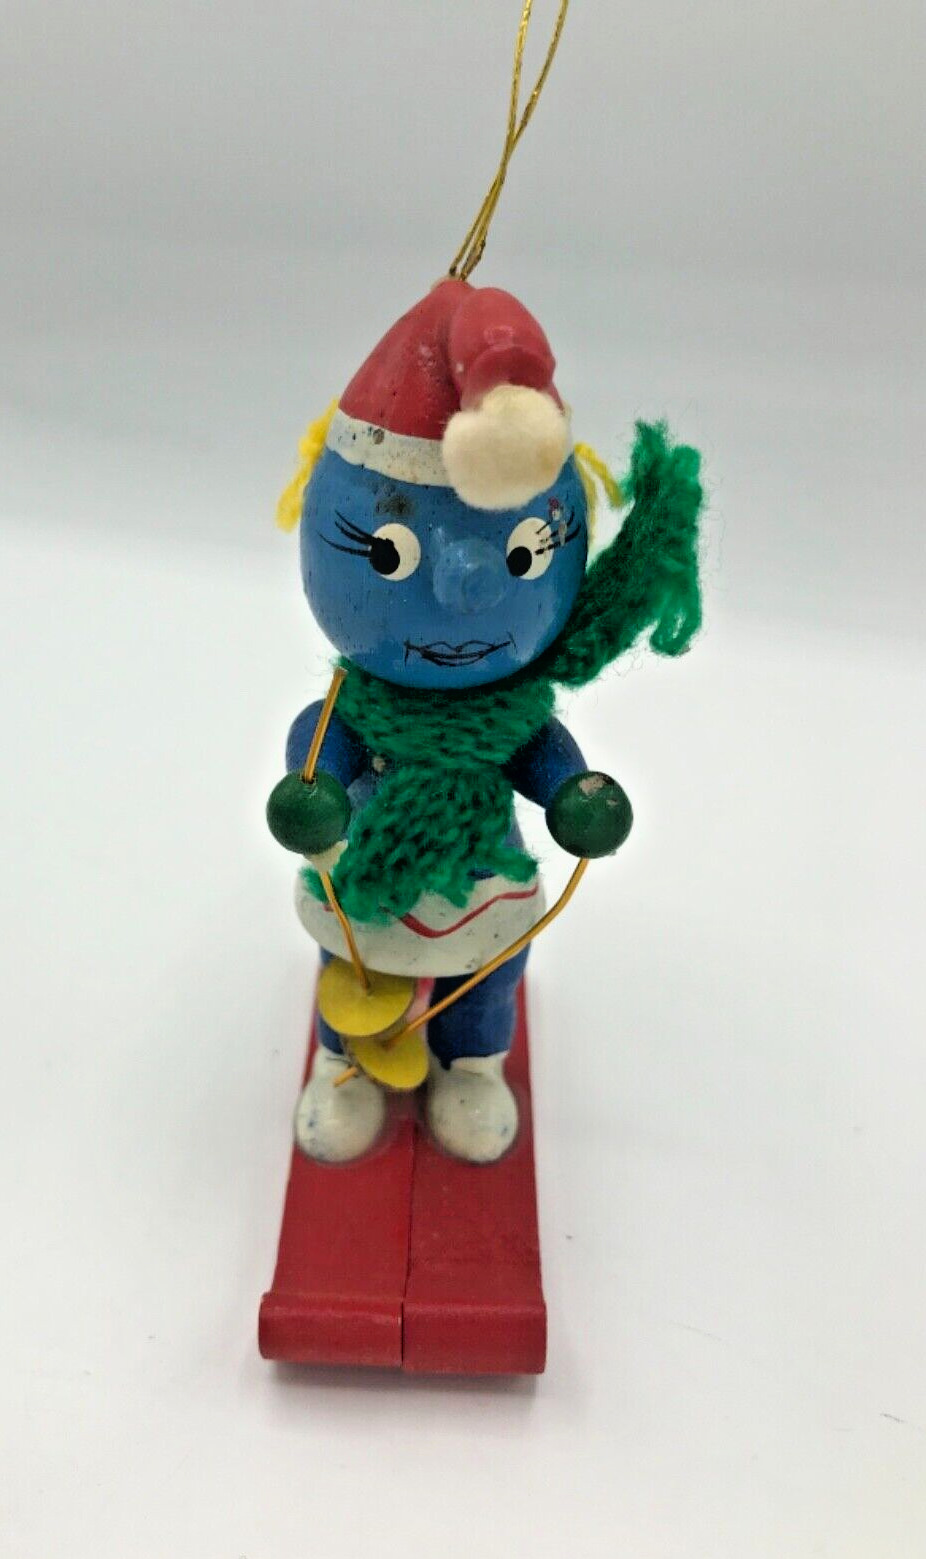 Vintage Wooden Smurf Ornament  on Skis  3.75 Inches Tall  CHRISTMAS